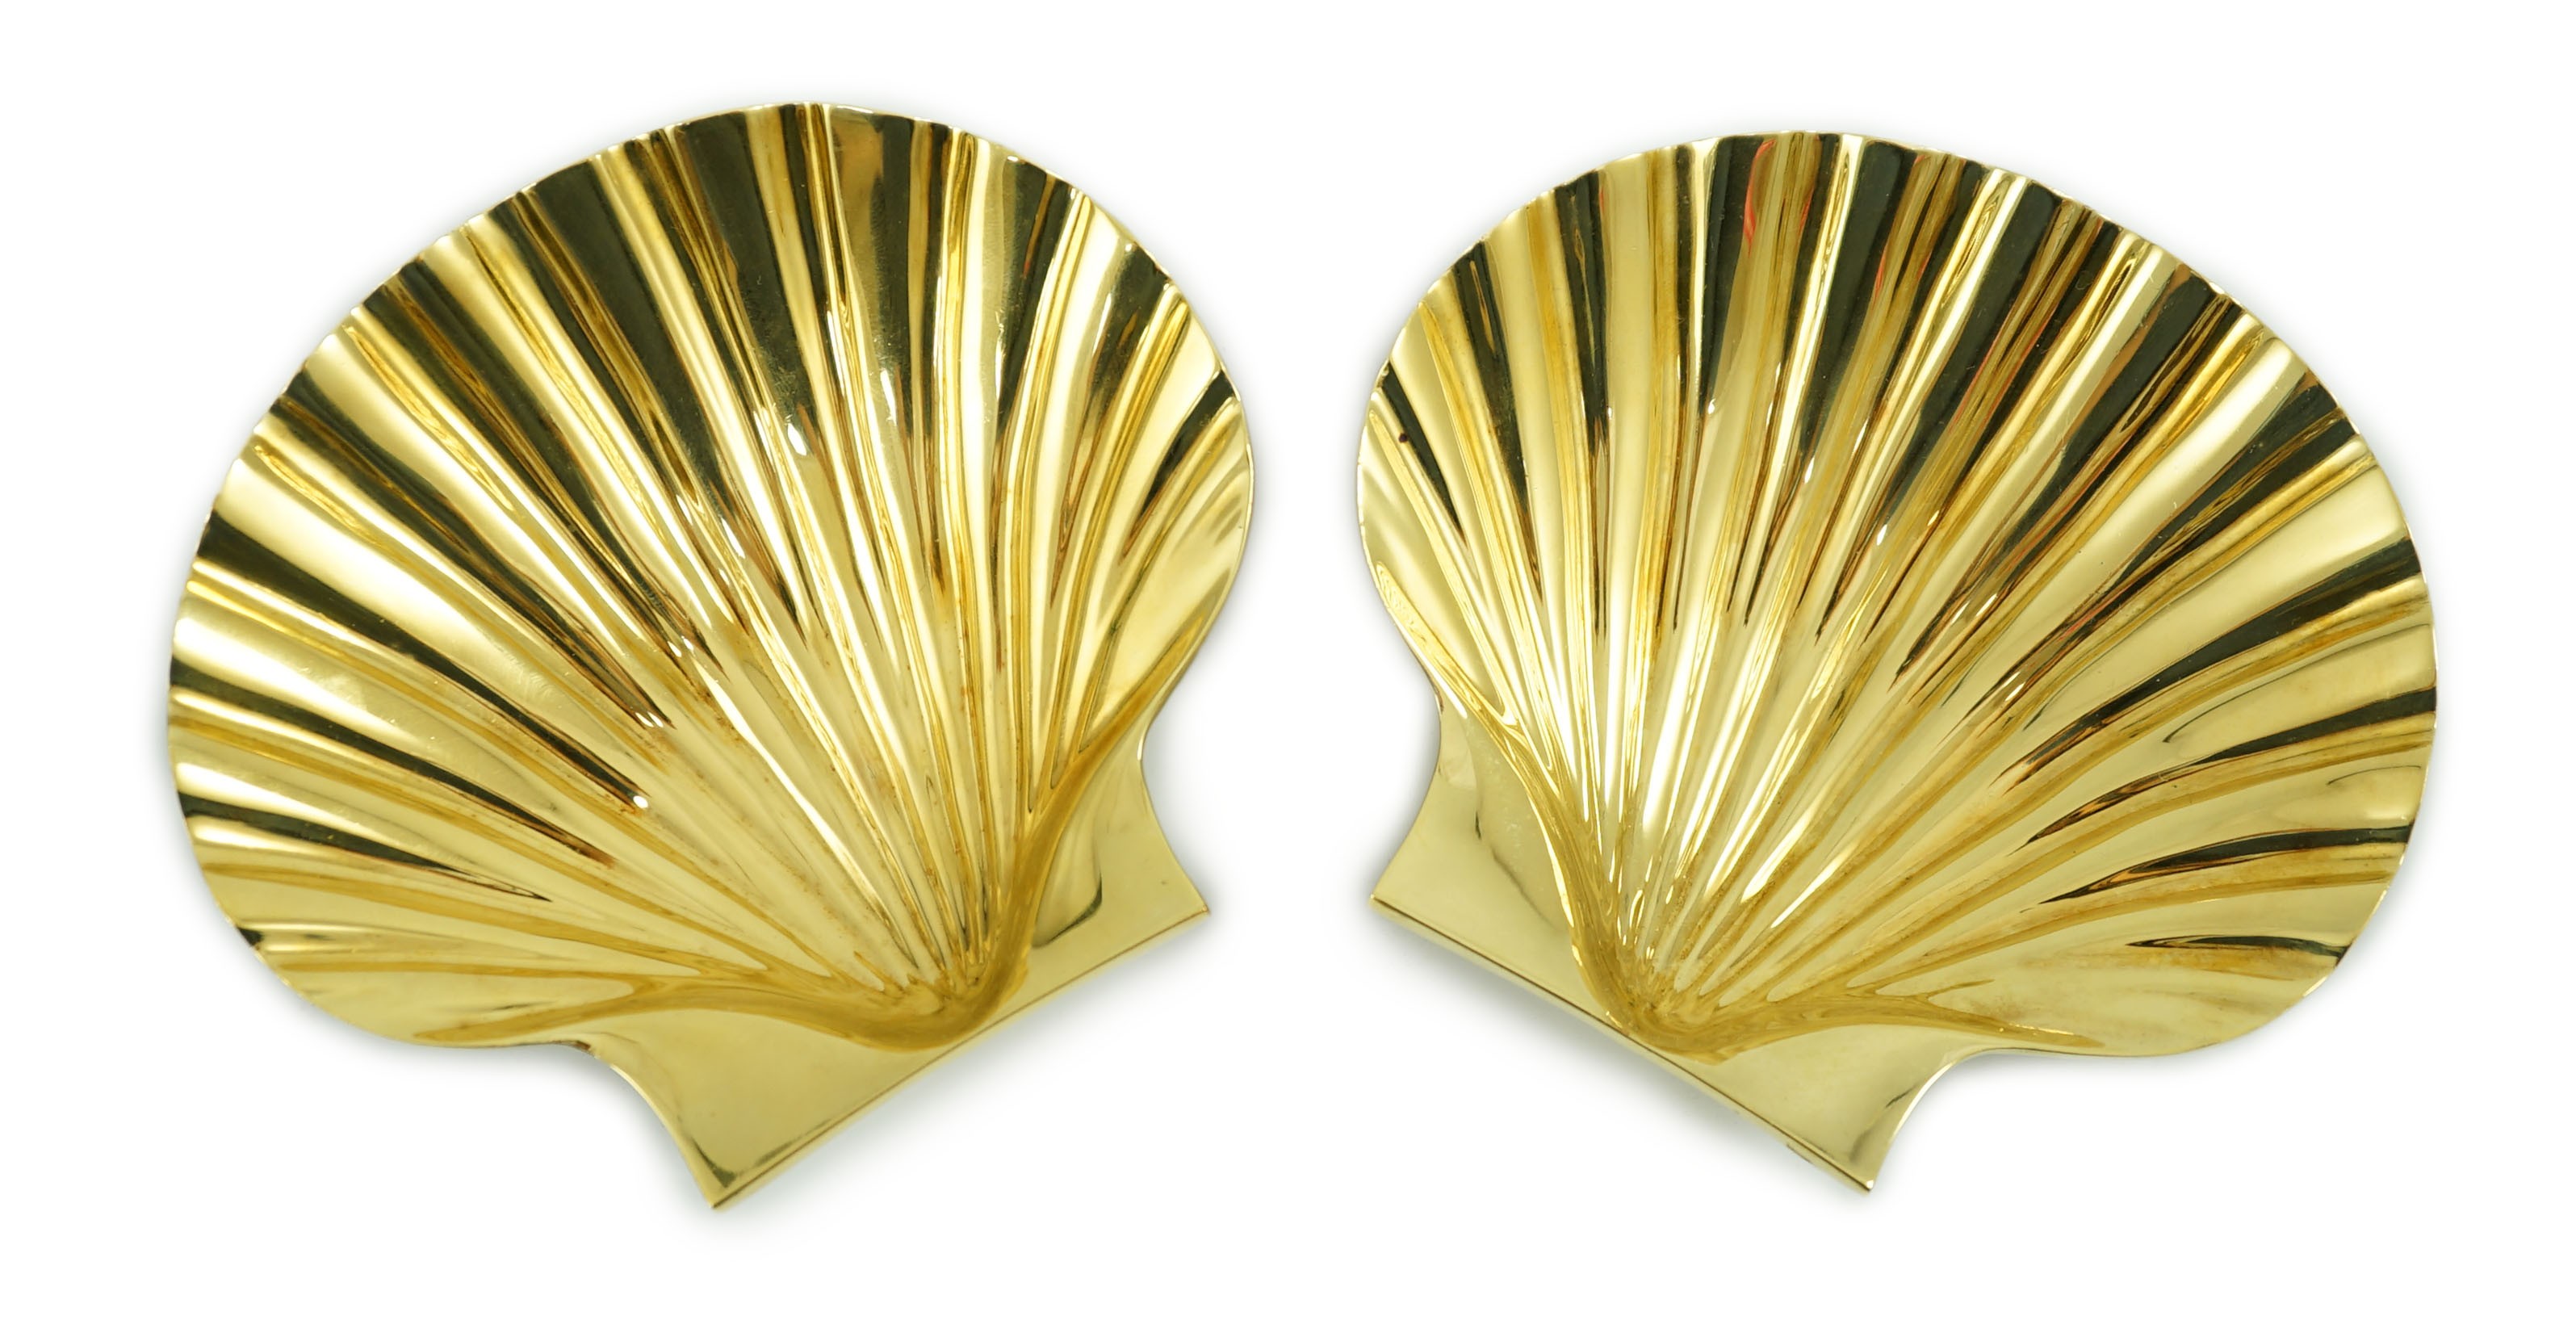 A cased pair of Elizabeth II silver gilt scallop shell butter dishes by Collingwood & Co